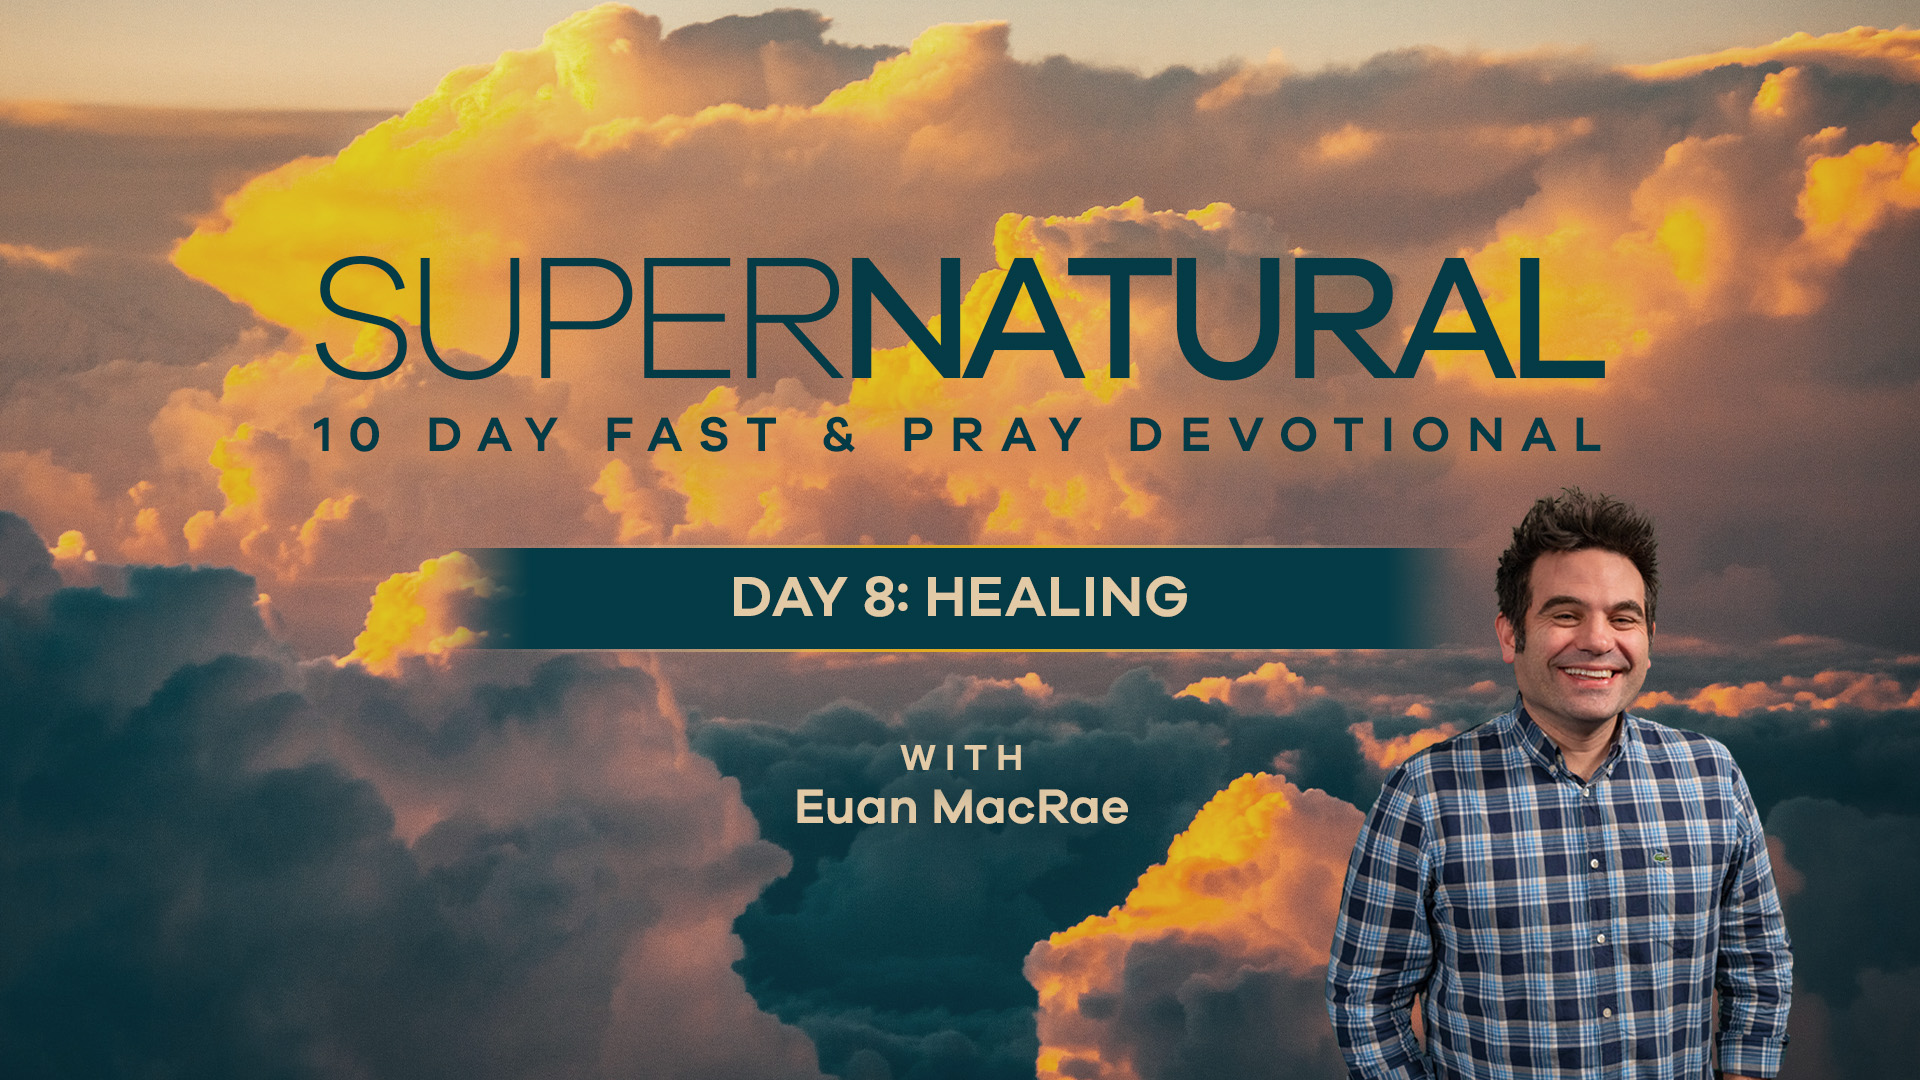 Video image for 'Day 8: Healing'' of the 10-Day Supernatural Devotional about healing.